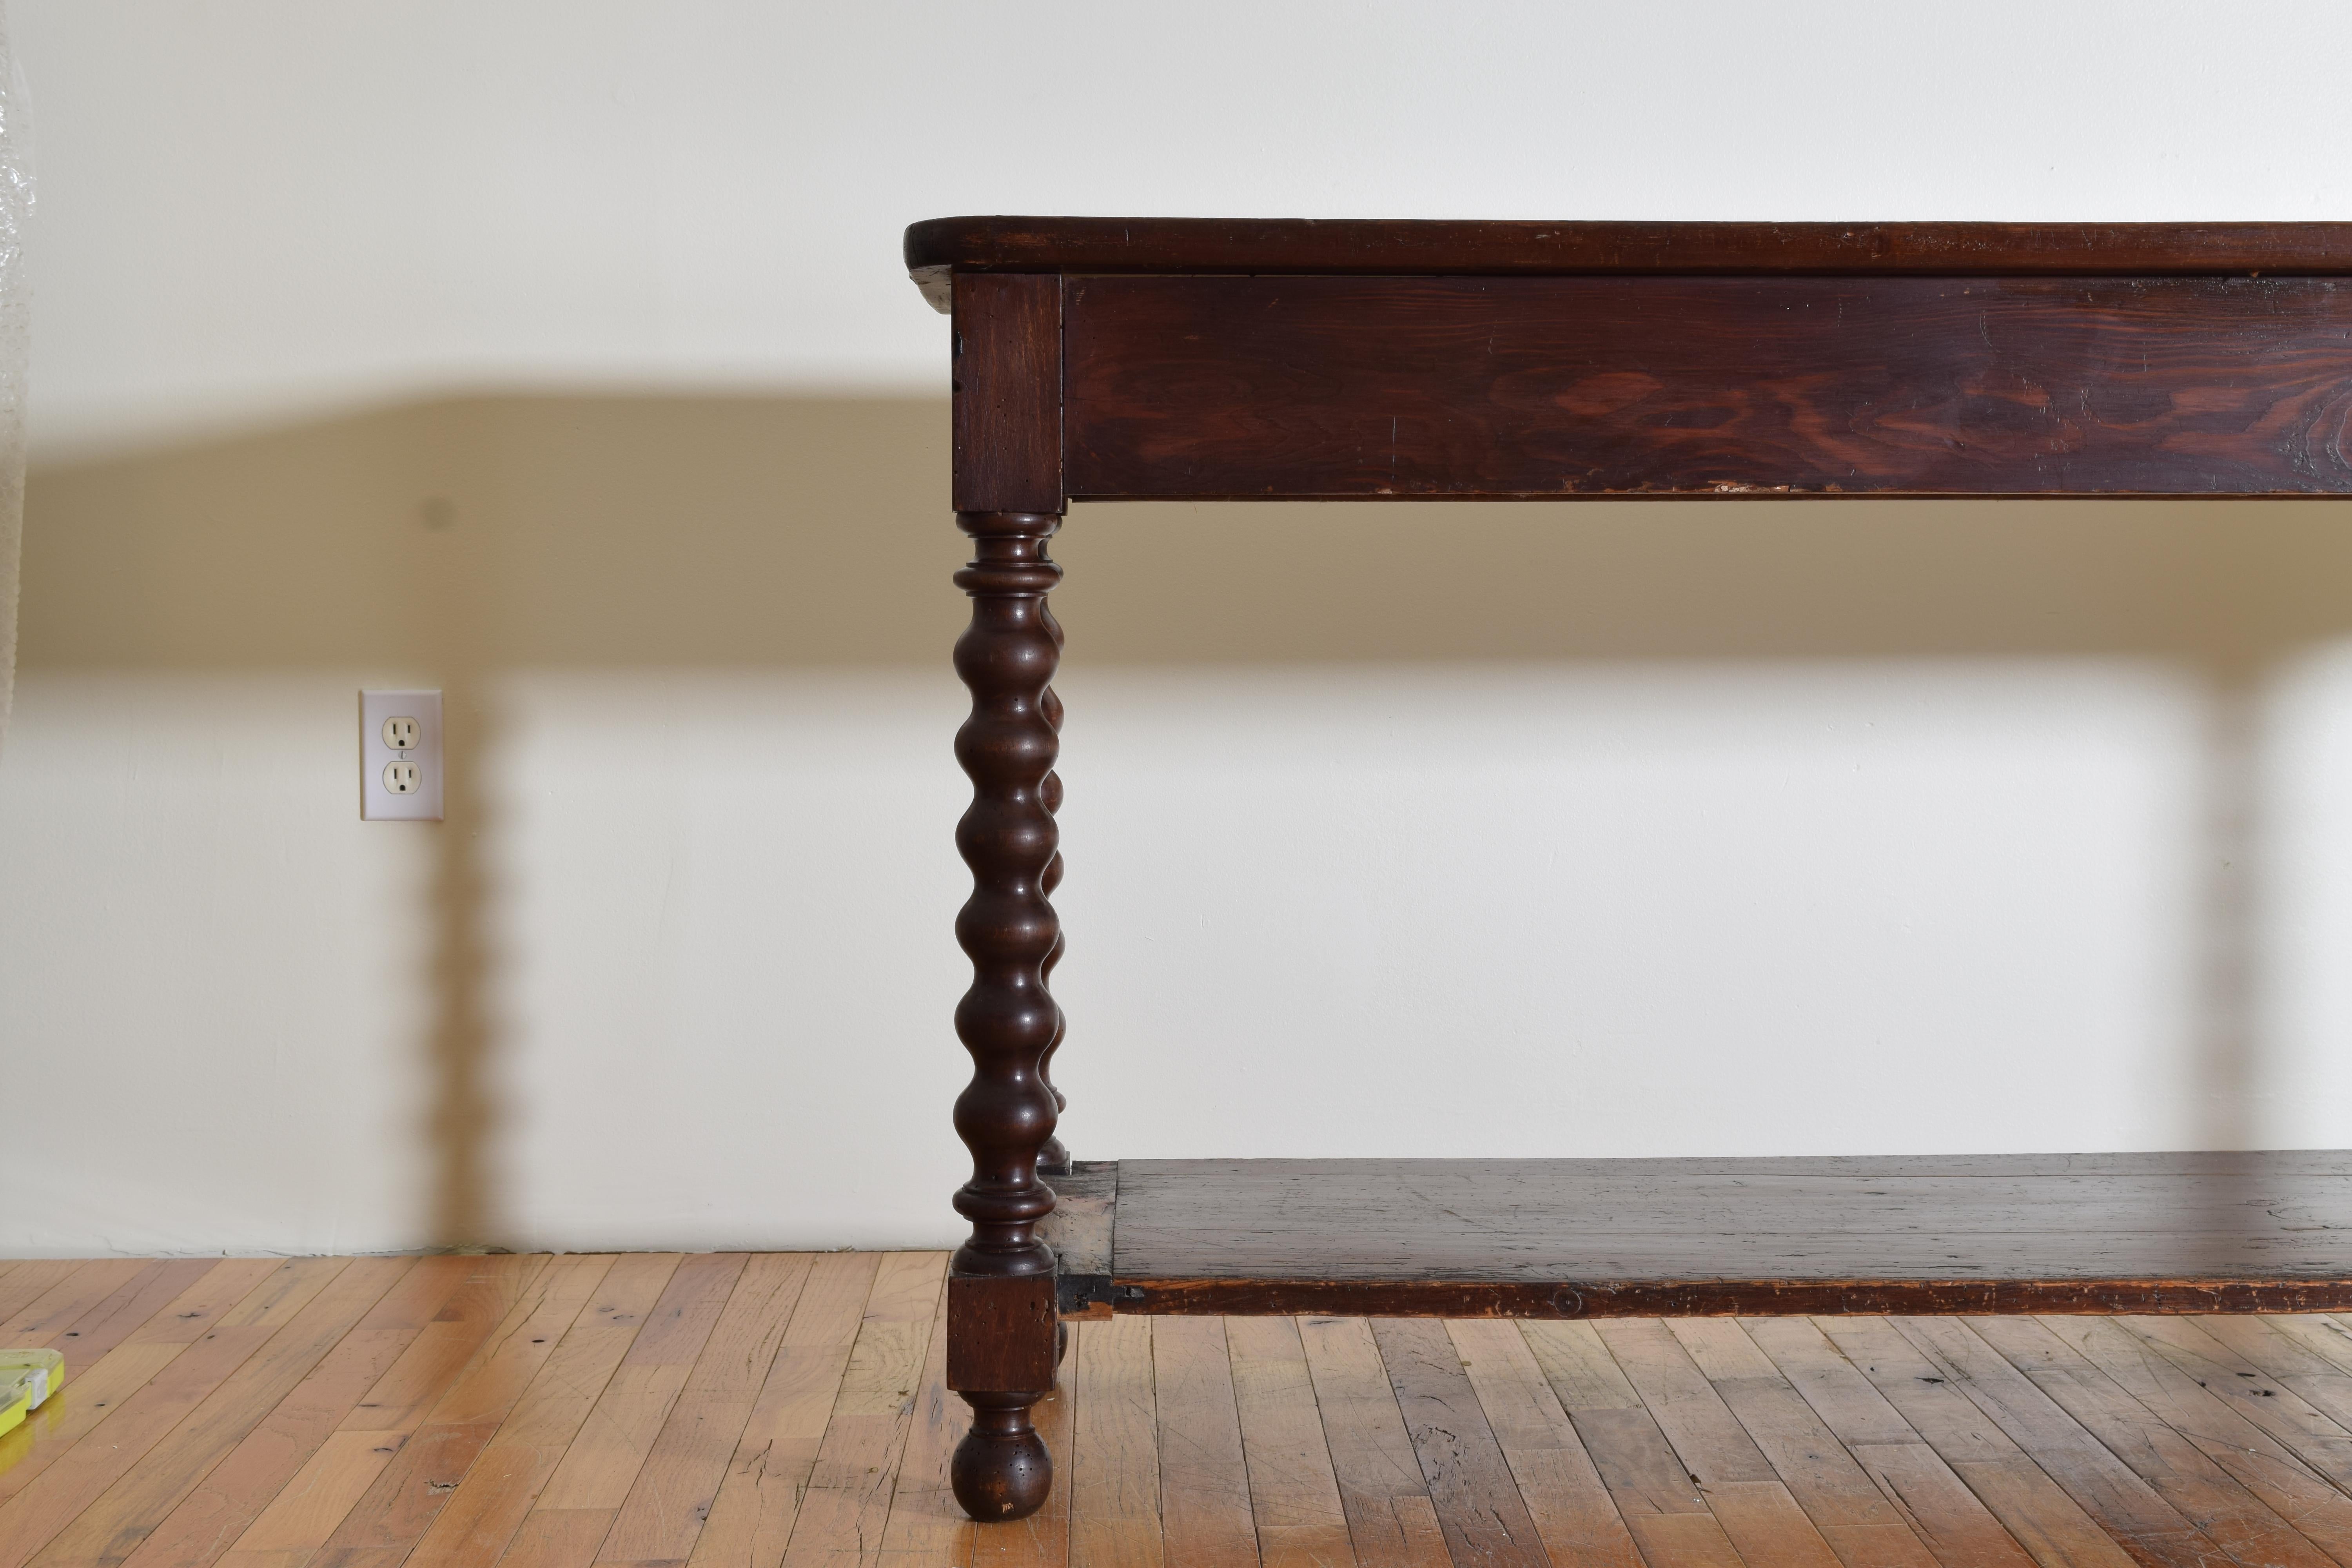 French Baroque Revival Period Turned Oak Sofa or Console Table, Mid-19th Century 3